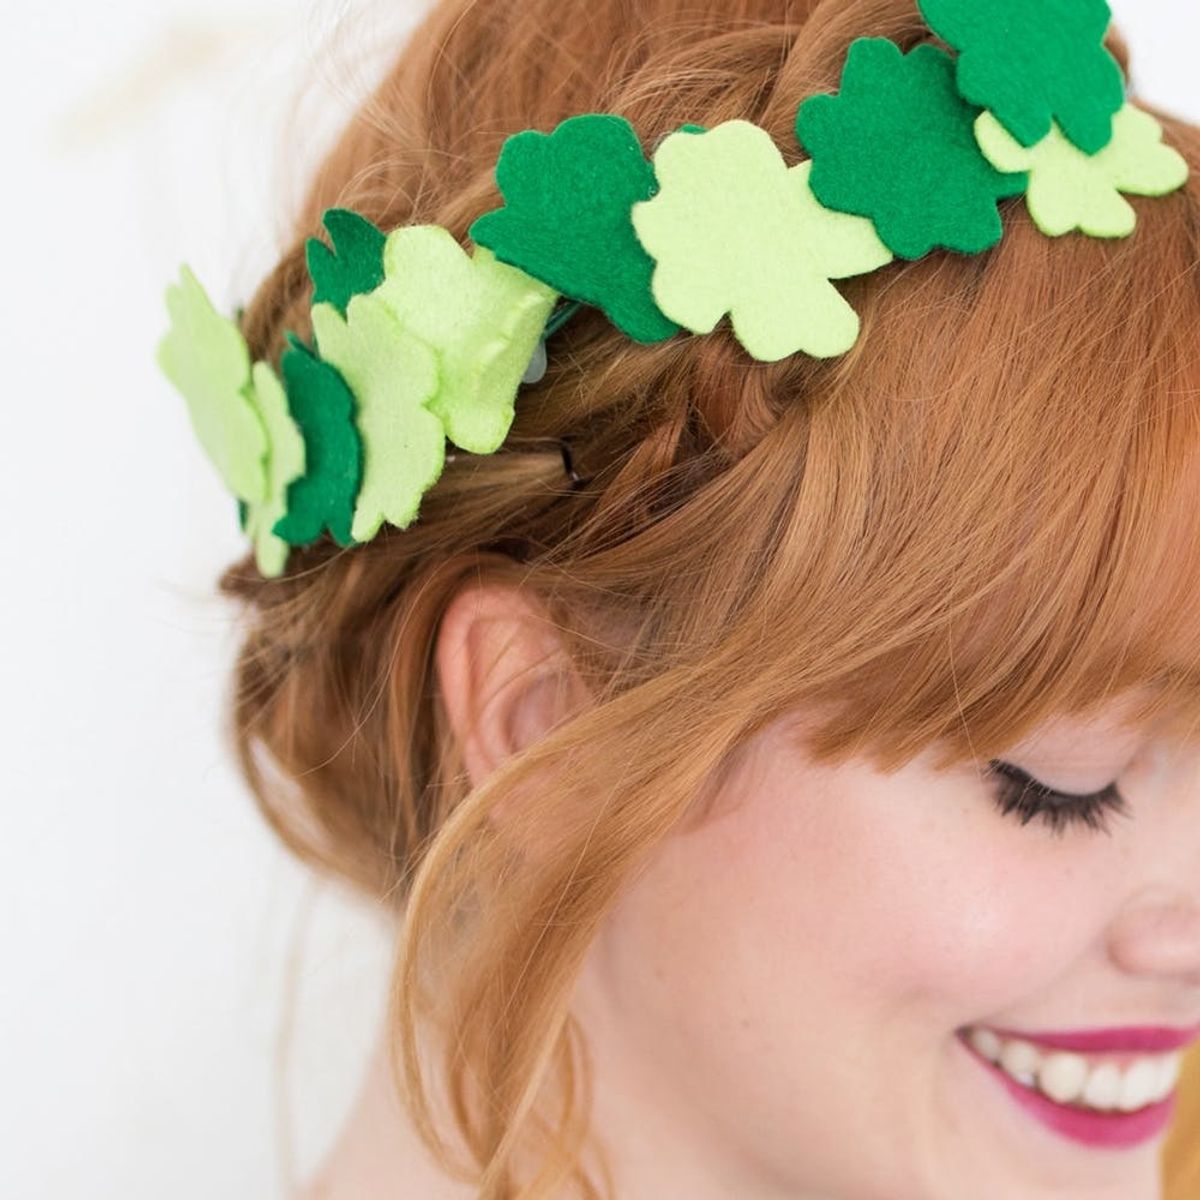 Get Ready for St. Patrick’s Day With This Fancy Clover Crown